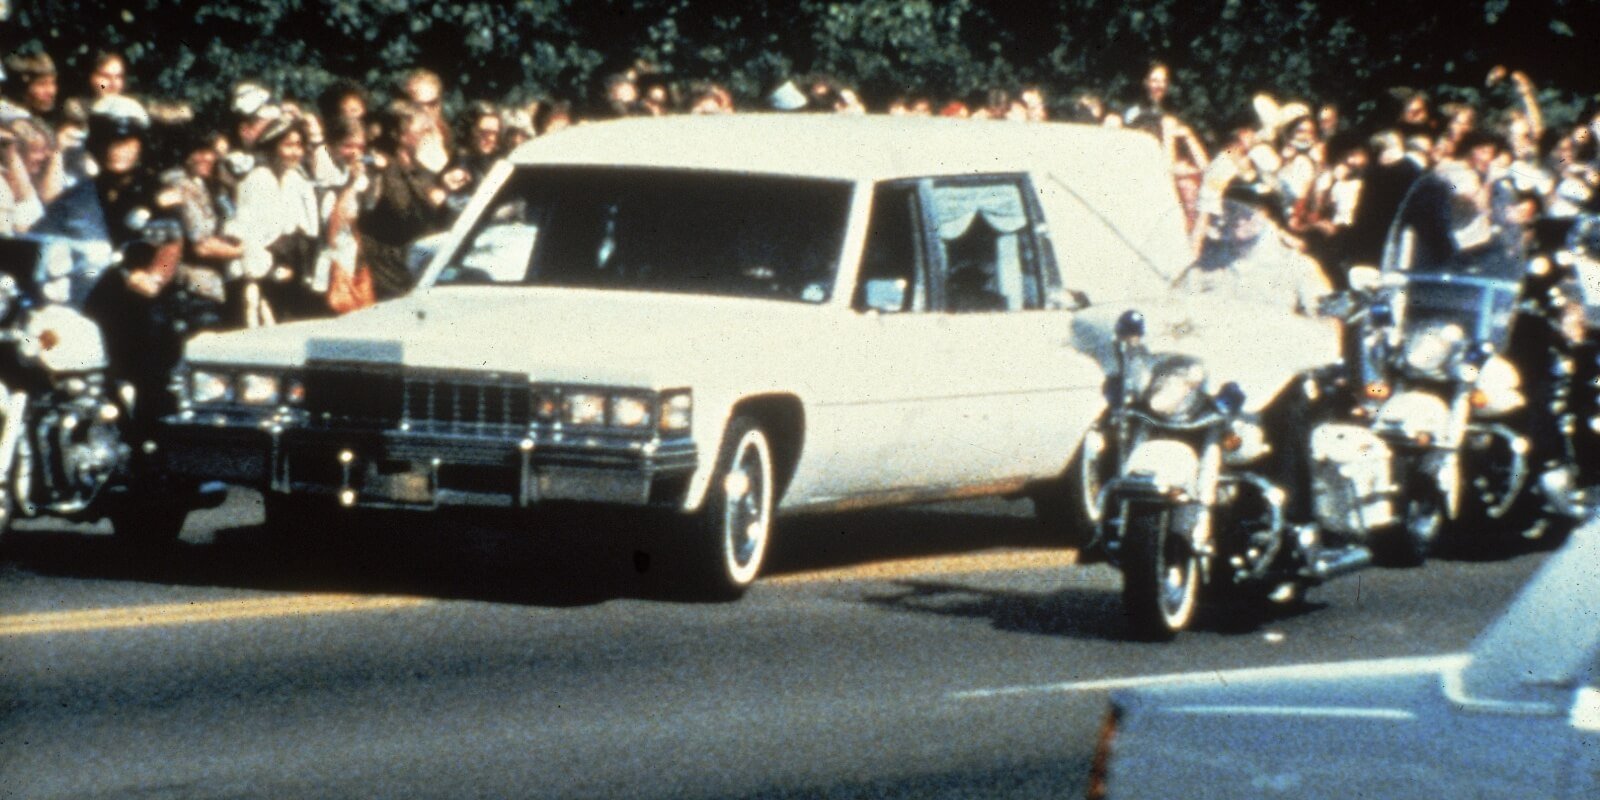 Elvis Presley's funeral hearse was a white Cadillac that transported his body from Graceland to Forest Hill Cemetary in Memphis, TN.